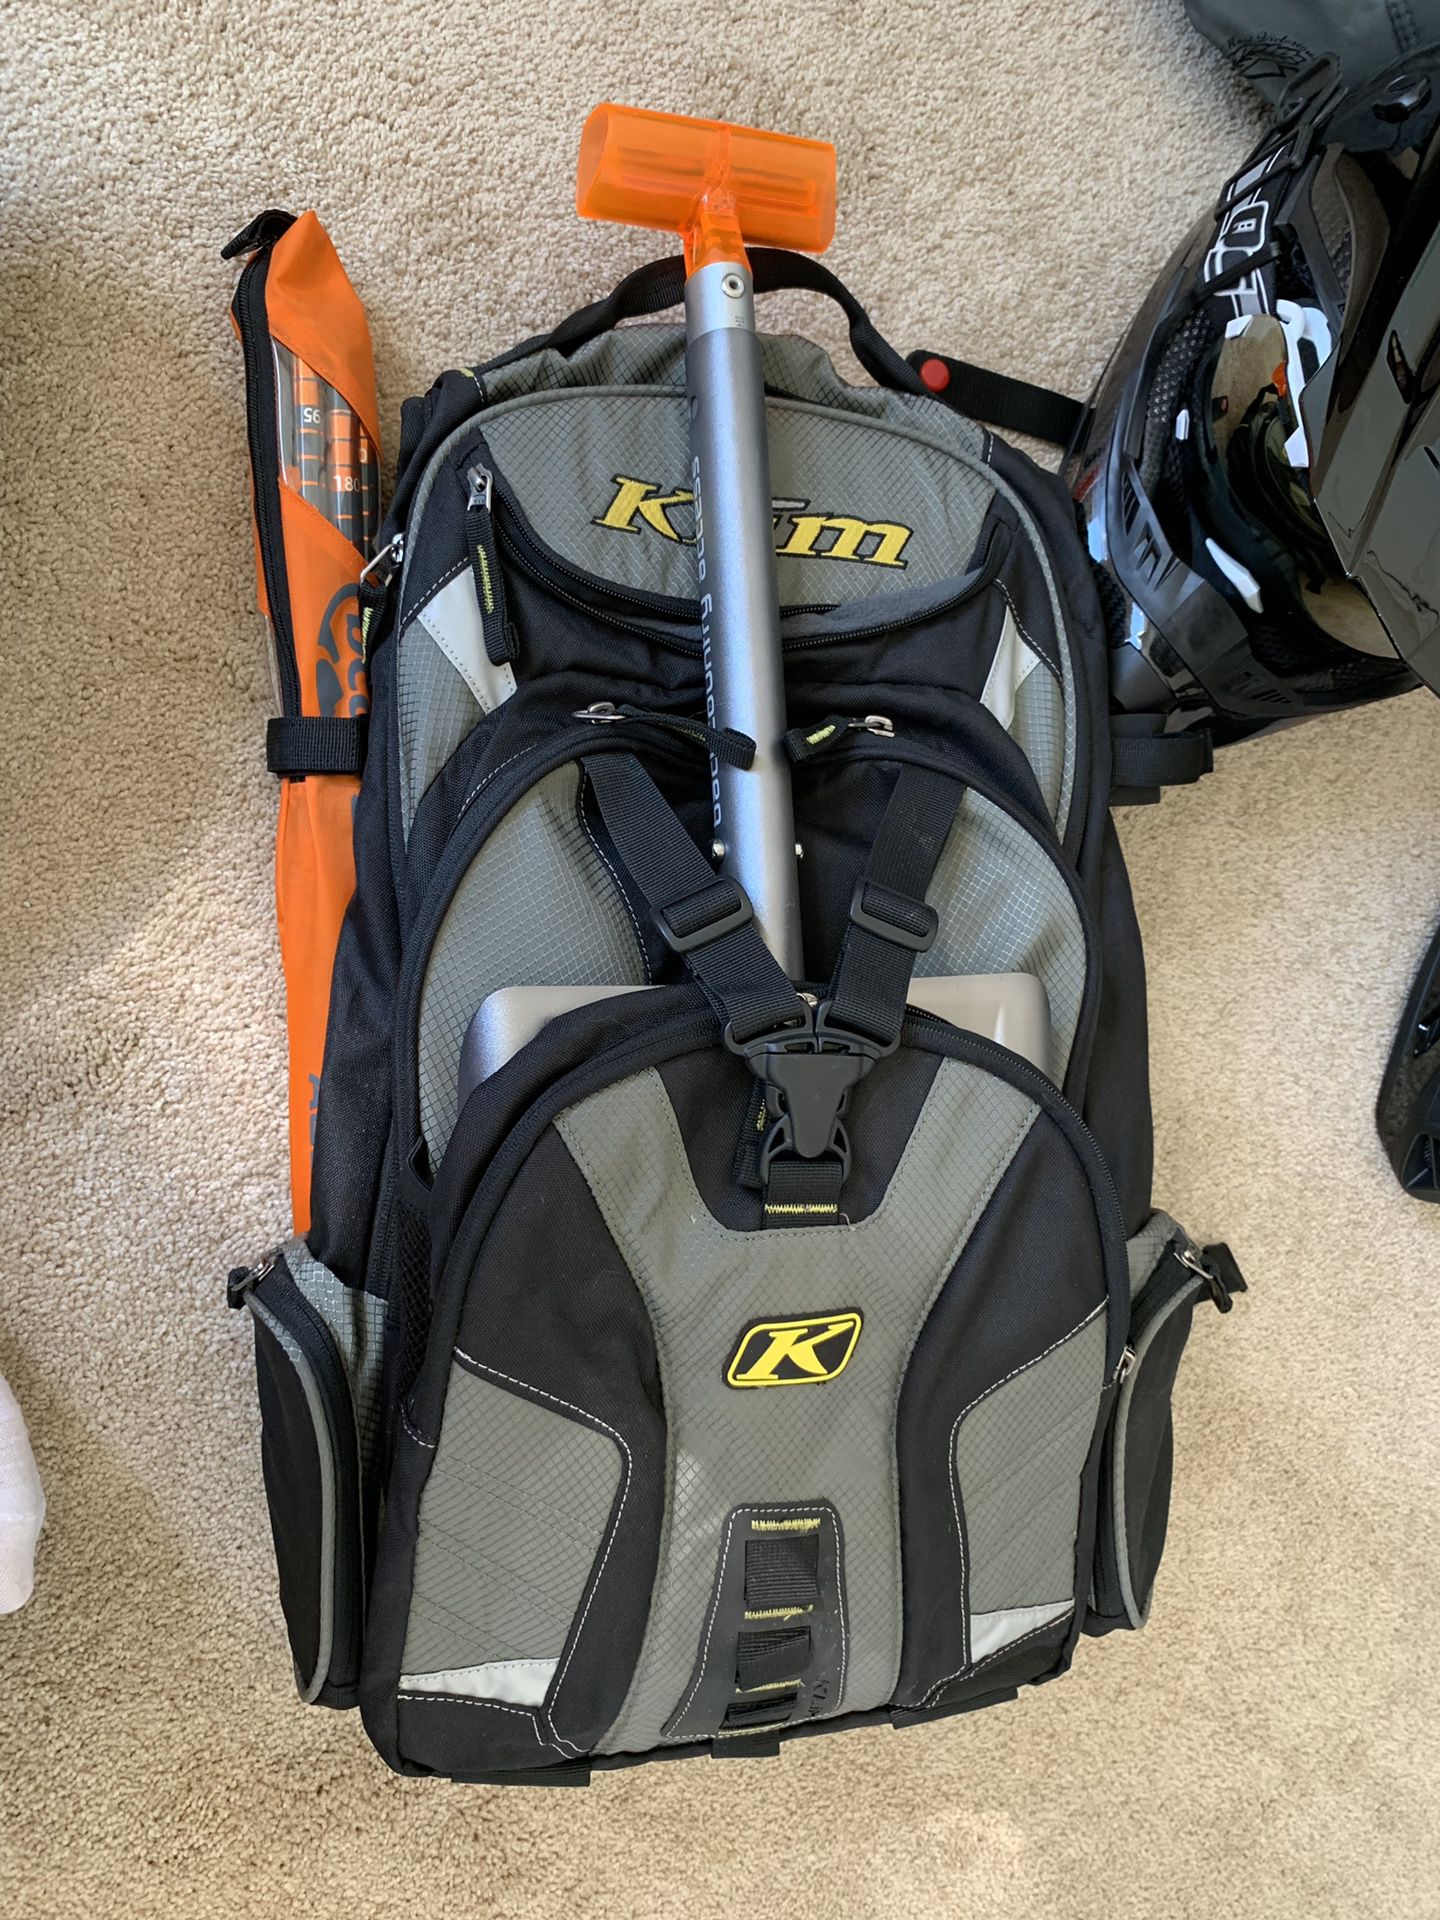 Klim snowmobile backpack, back country probe and shovel